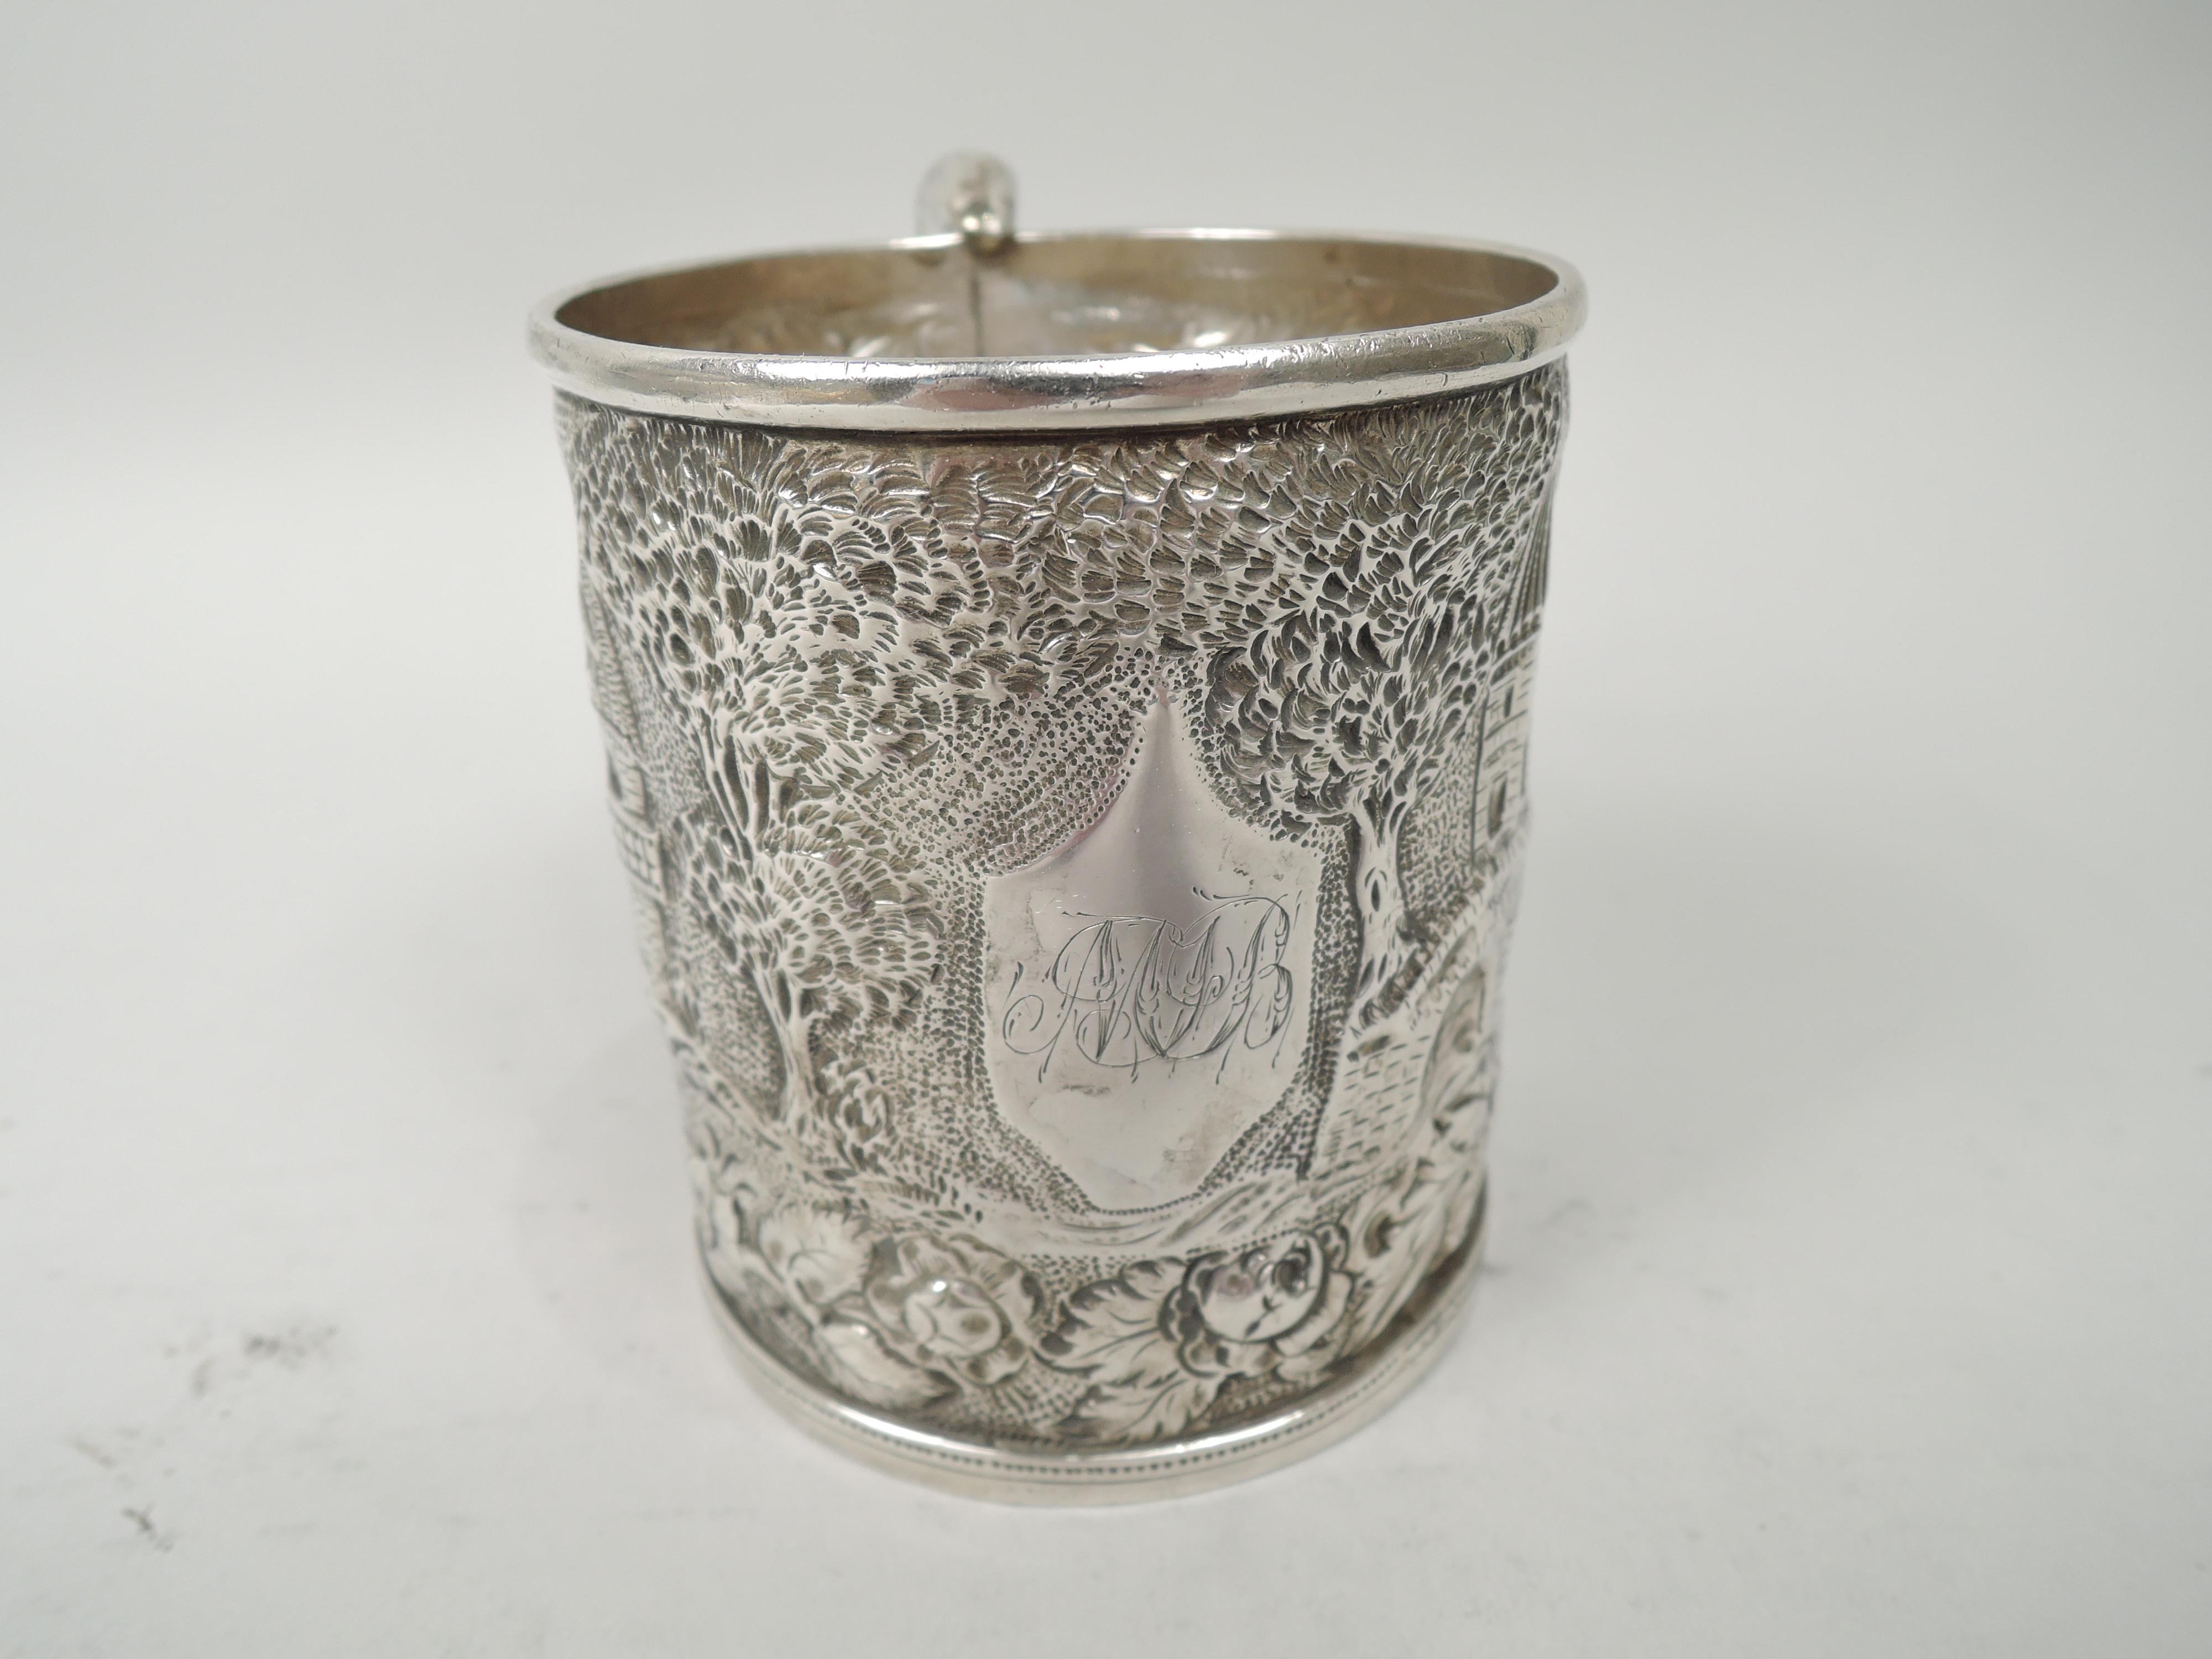 Victorian silver baby cup. Made by S. Kirk & Son in Baltimore, ca 1870. Drum form with plain rim. Foot same with beaded and linear borders. Double-scroll handle with engraved feathering. Repousse landscape with vernacular buildings and bridge.